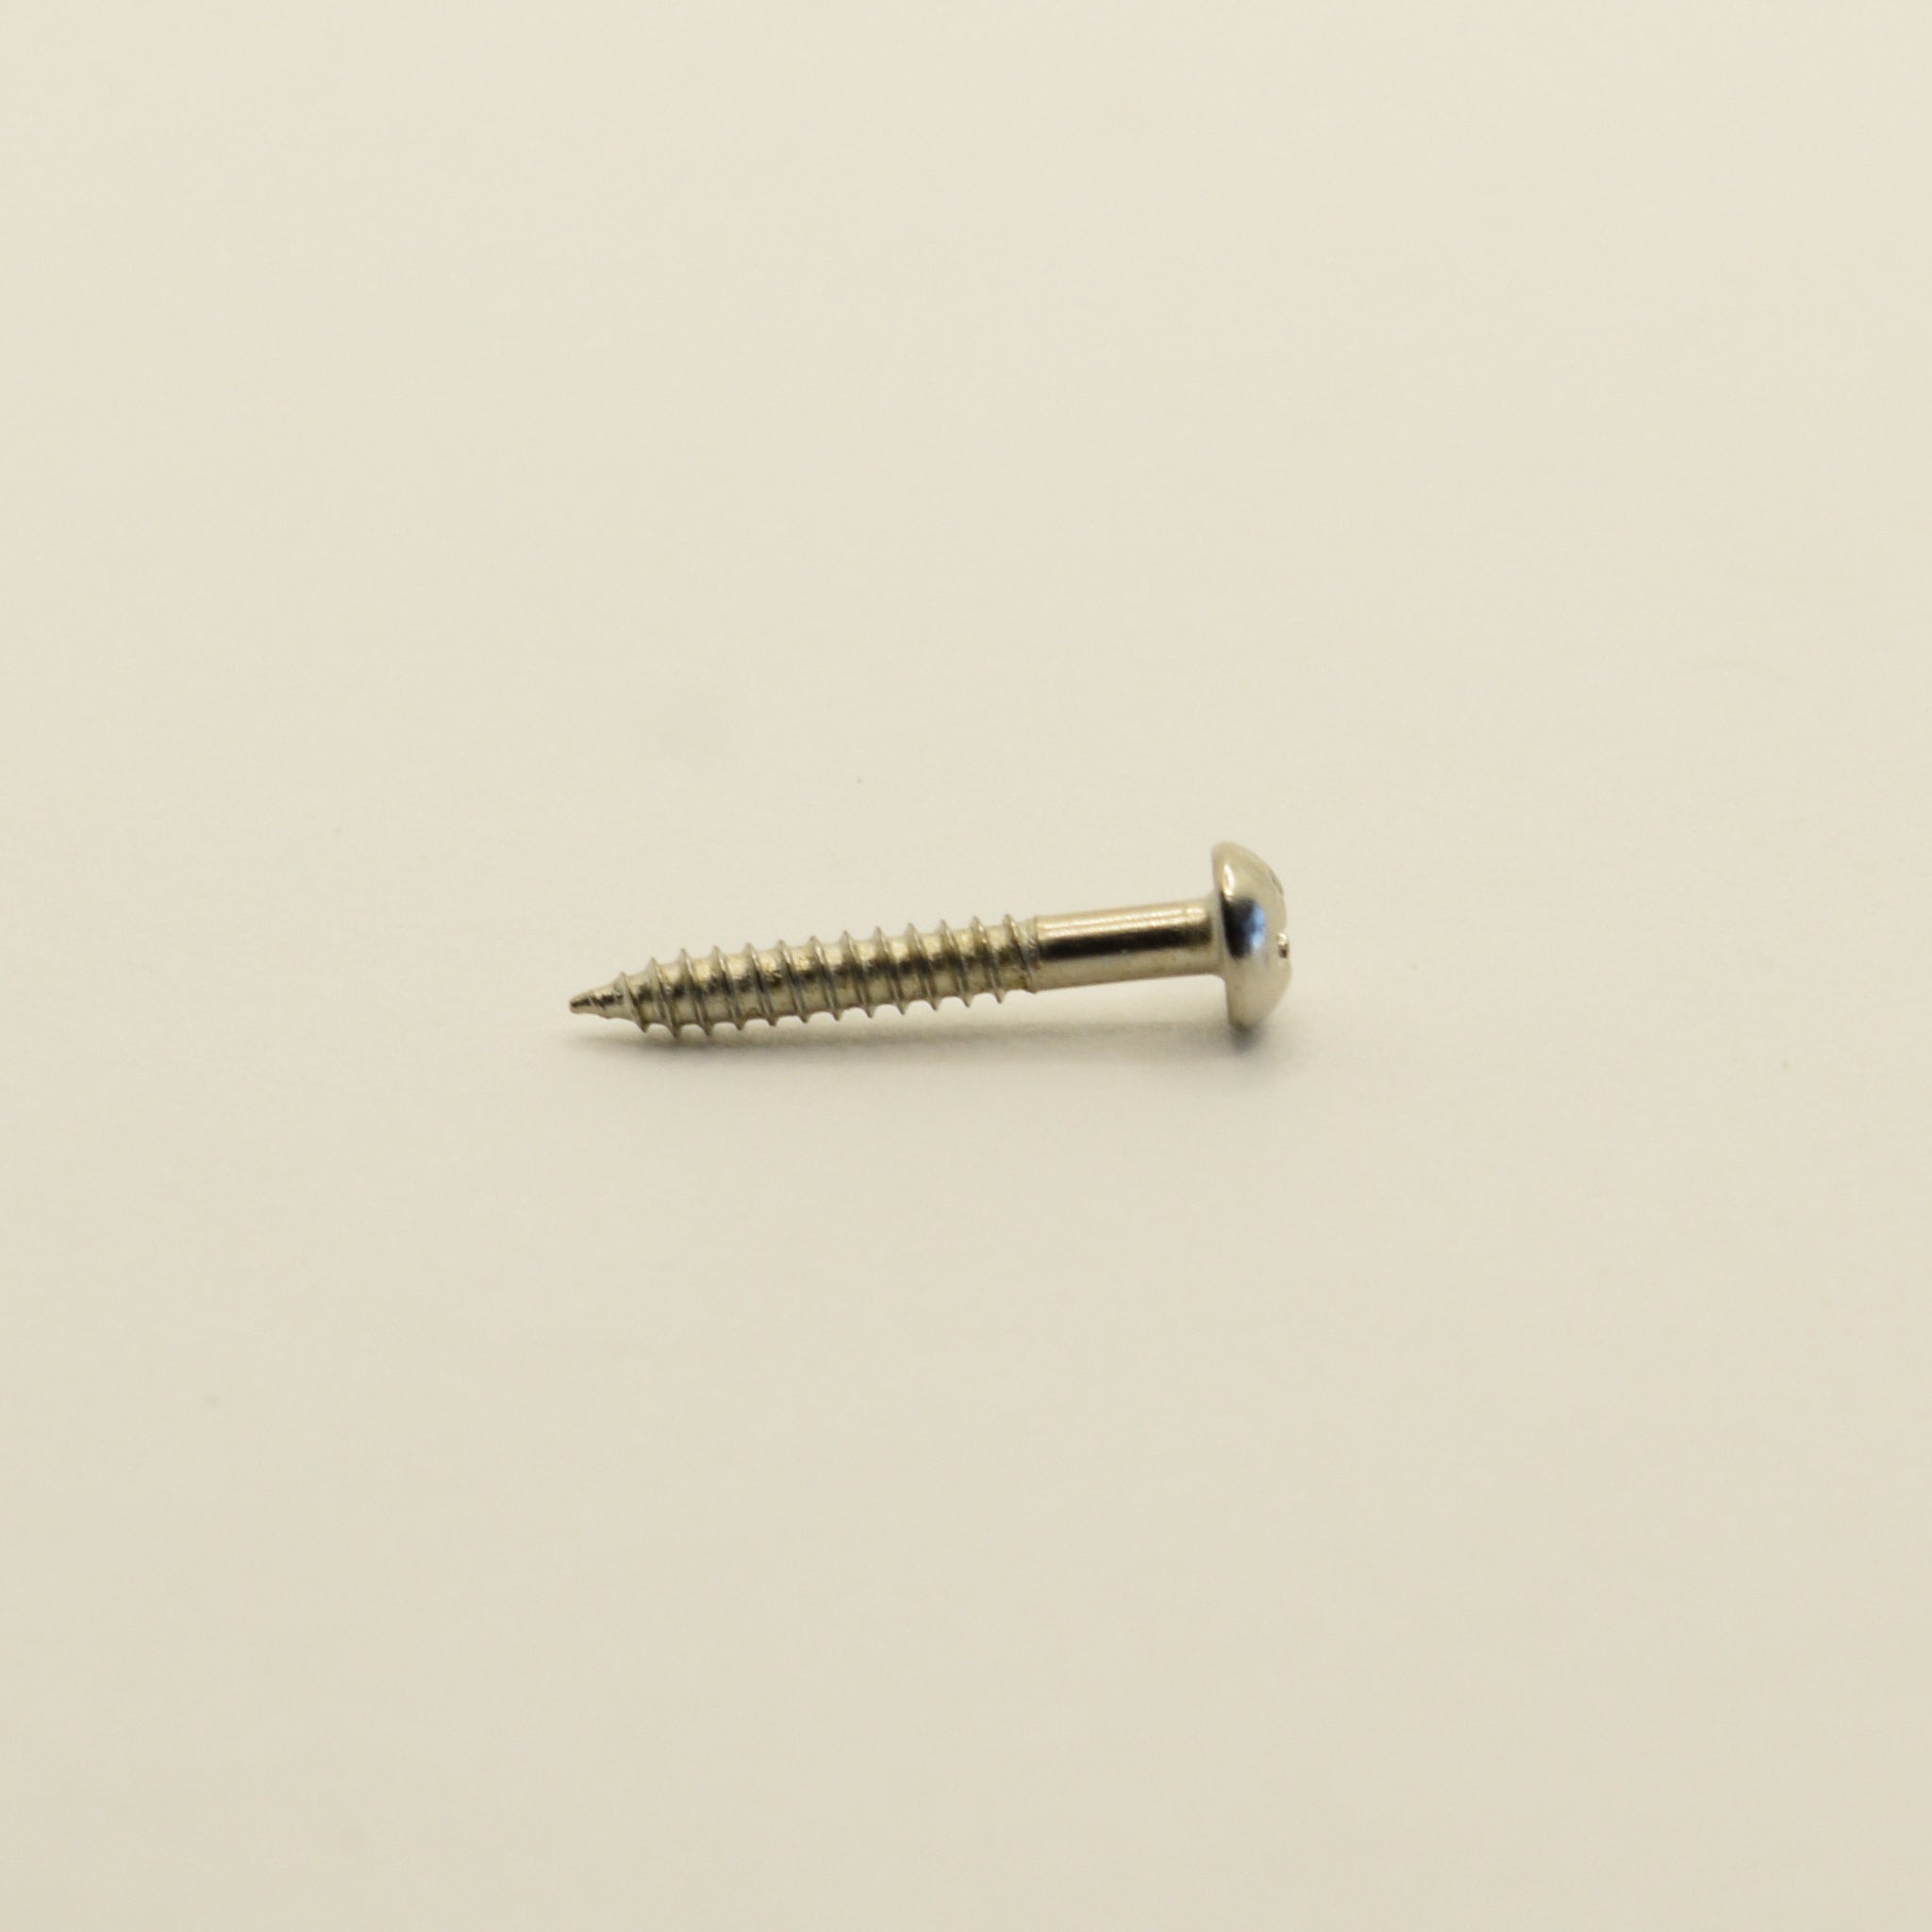 Chrome Steel Control Plate and Dog Ear P90 Screws 2.5mm x 19.5mm